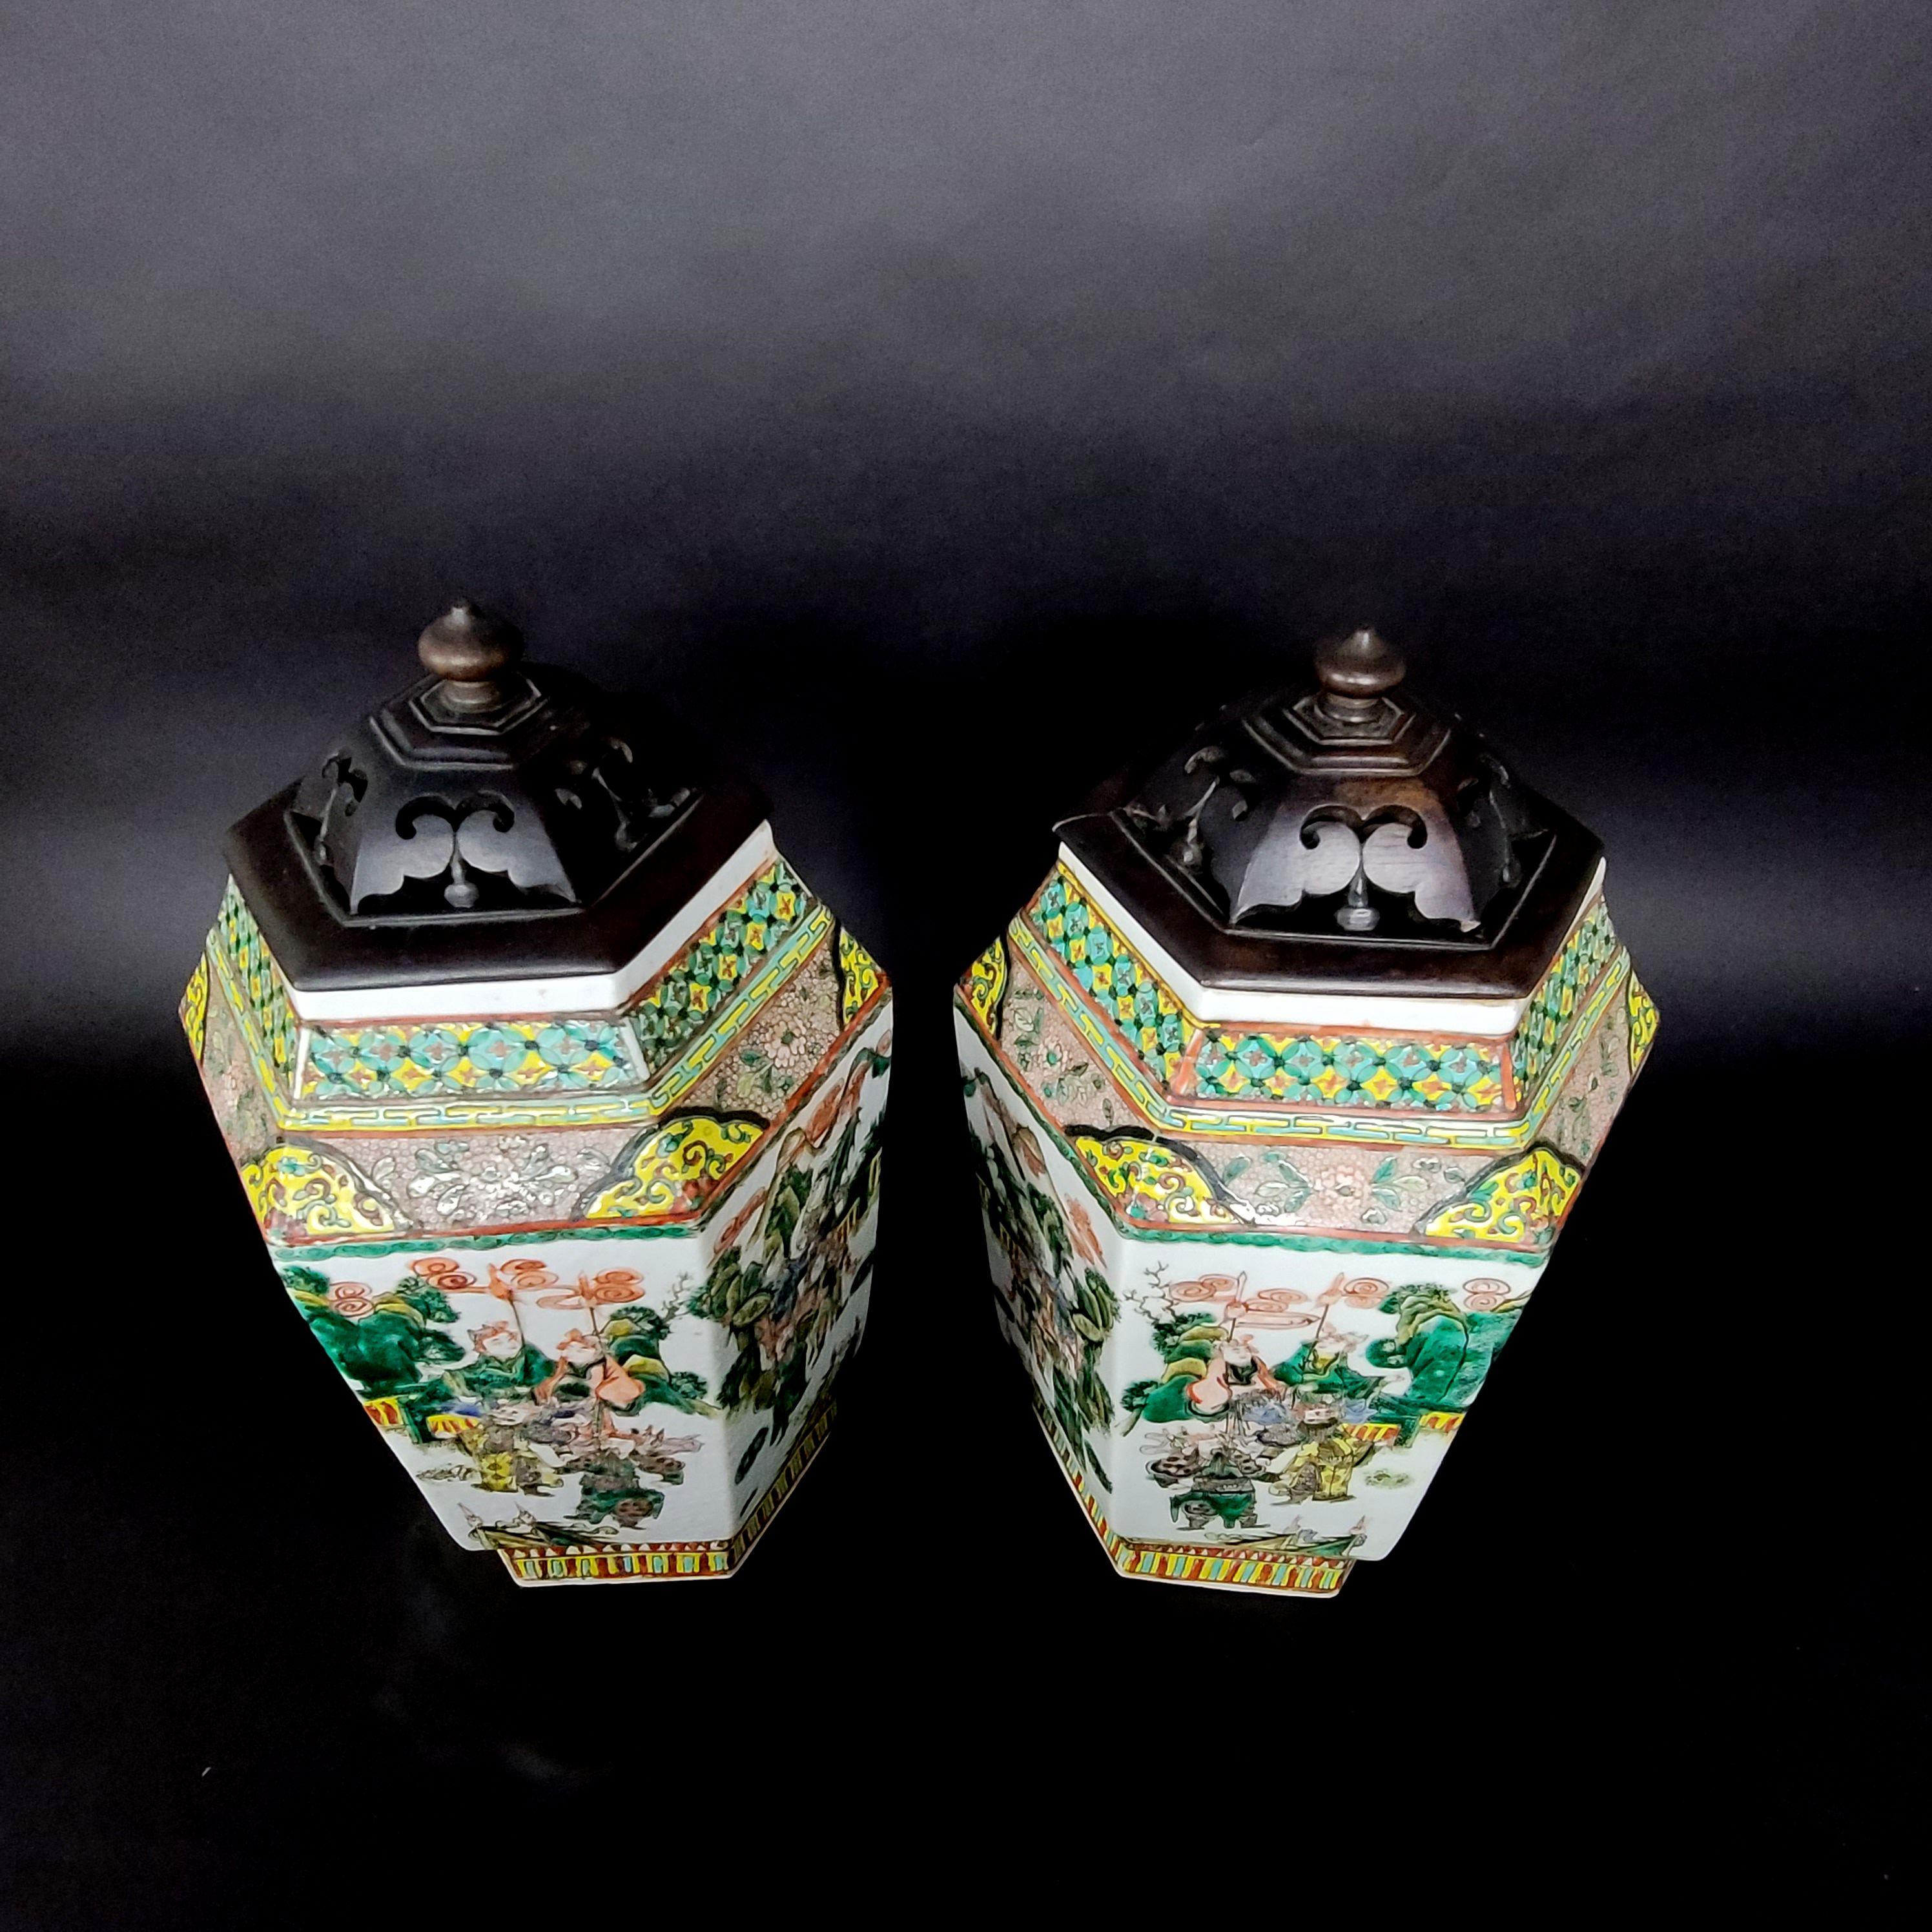 Matching Pair of Chinese Hexagonal Porcelain Vases, 19th Century For Sale 3